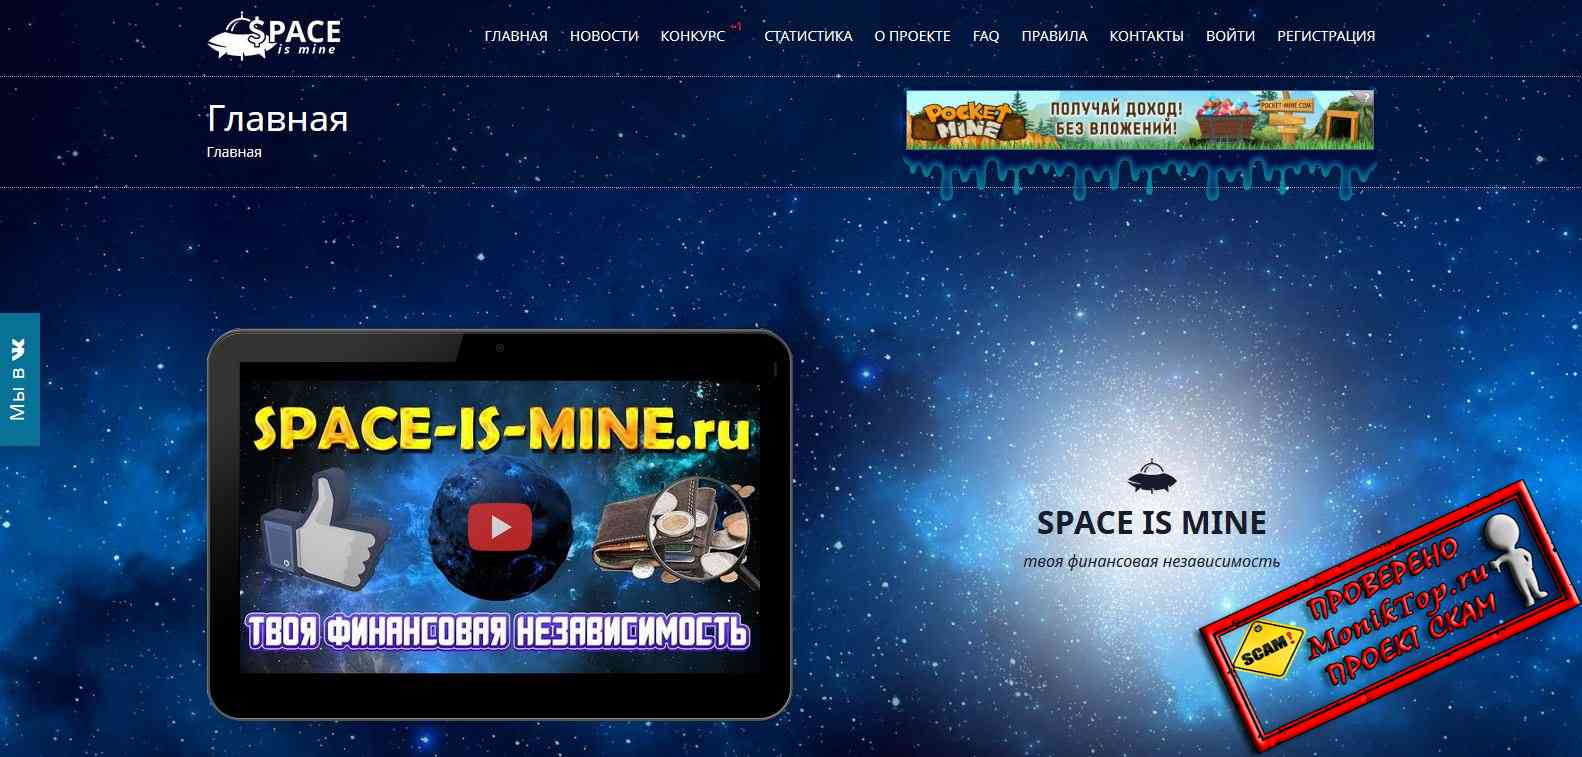 Space is mine